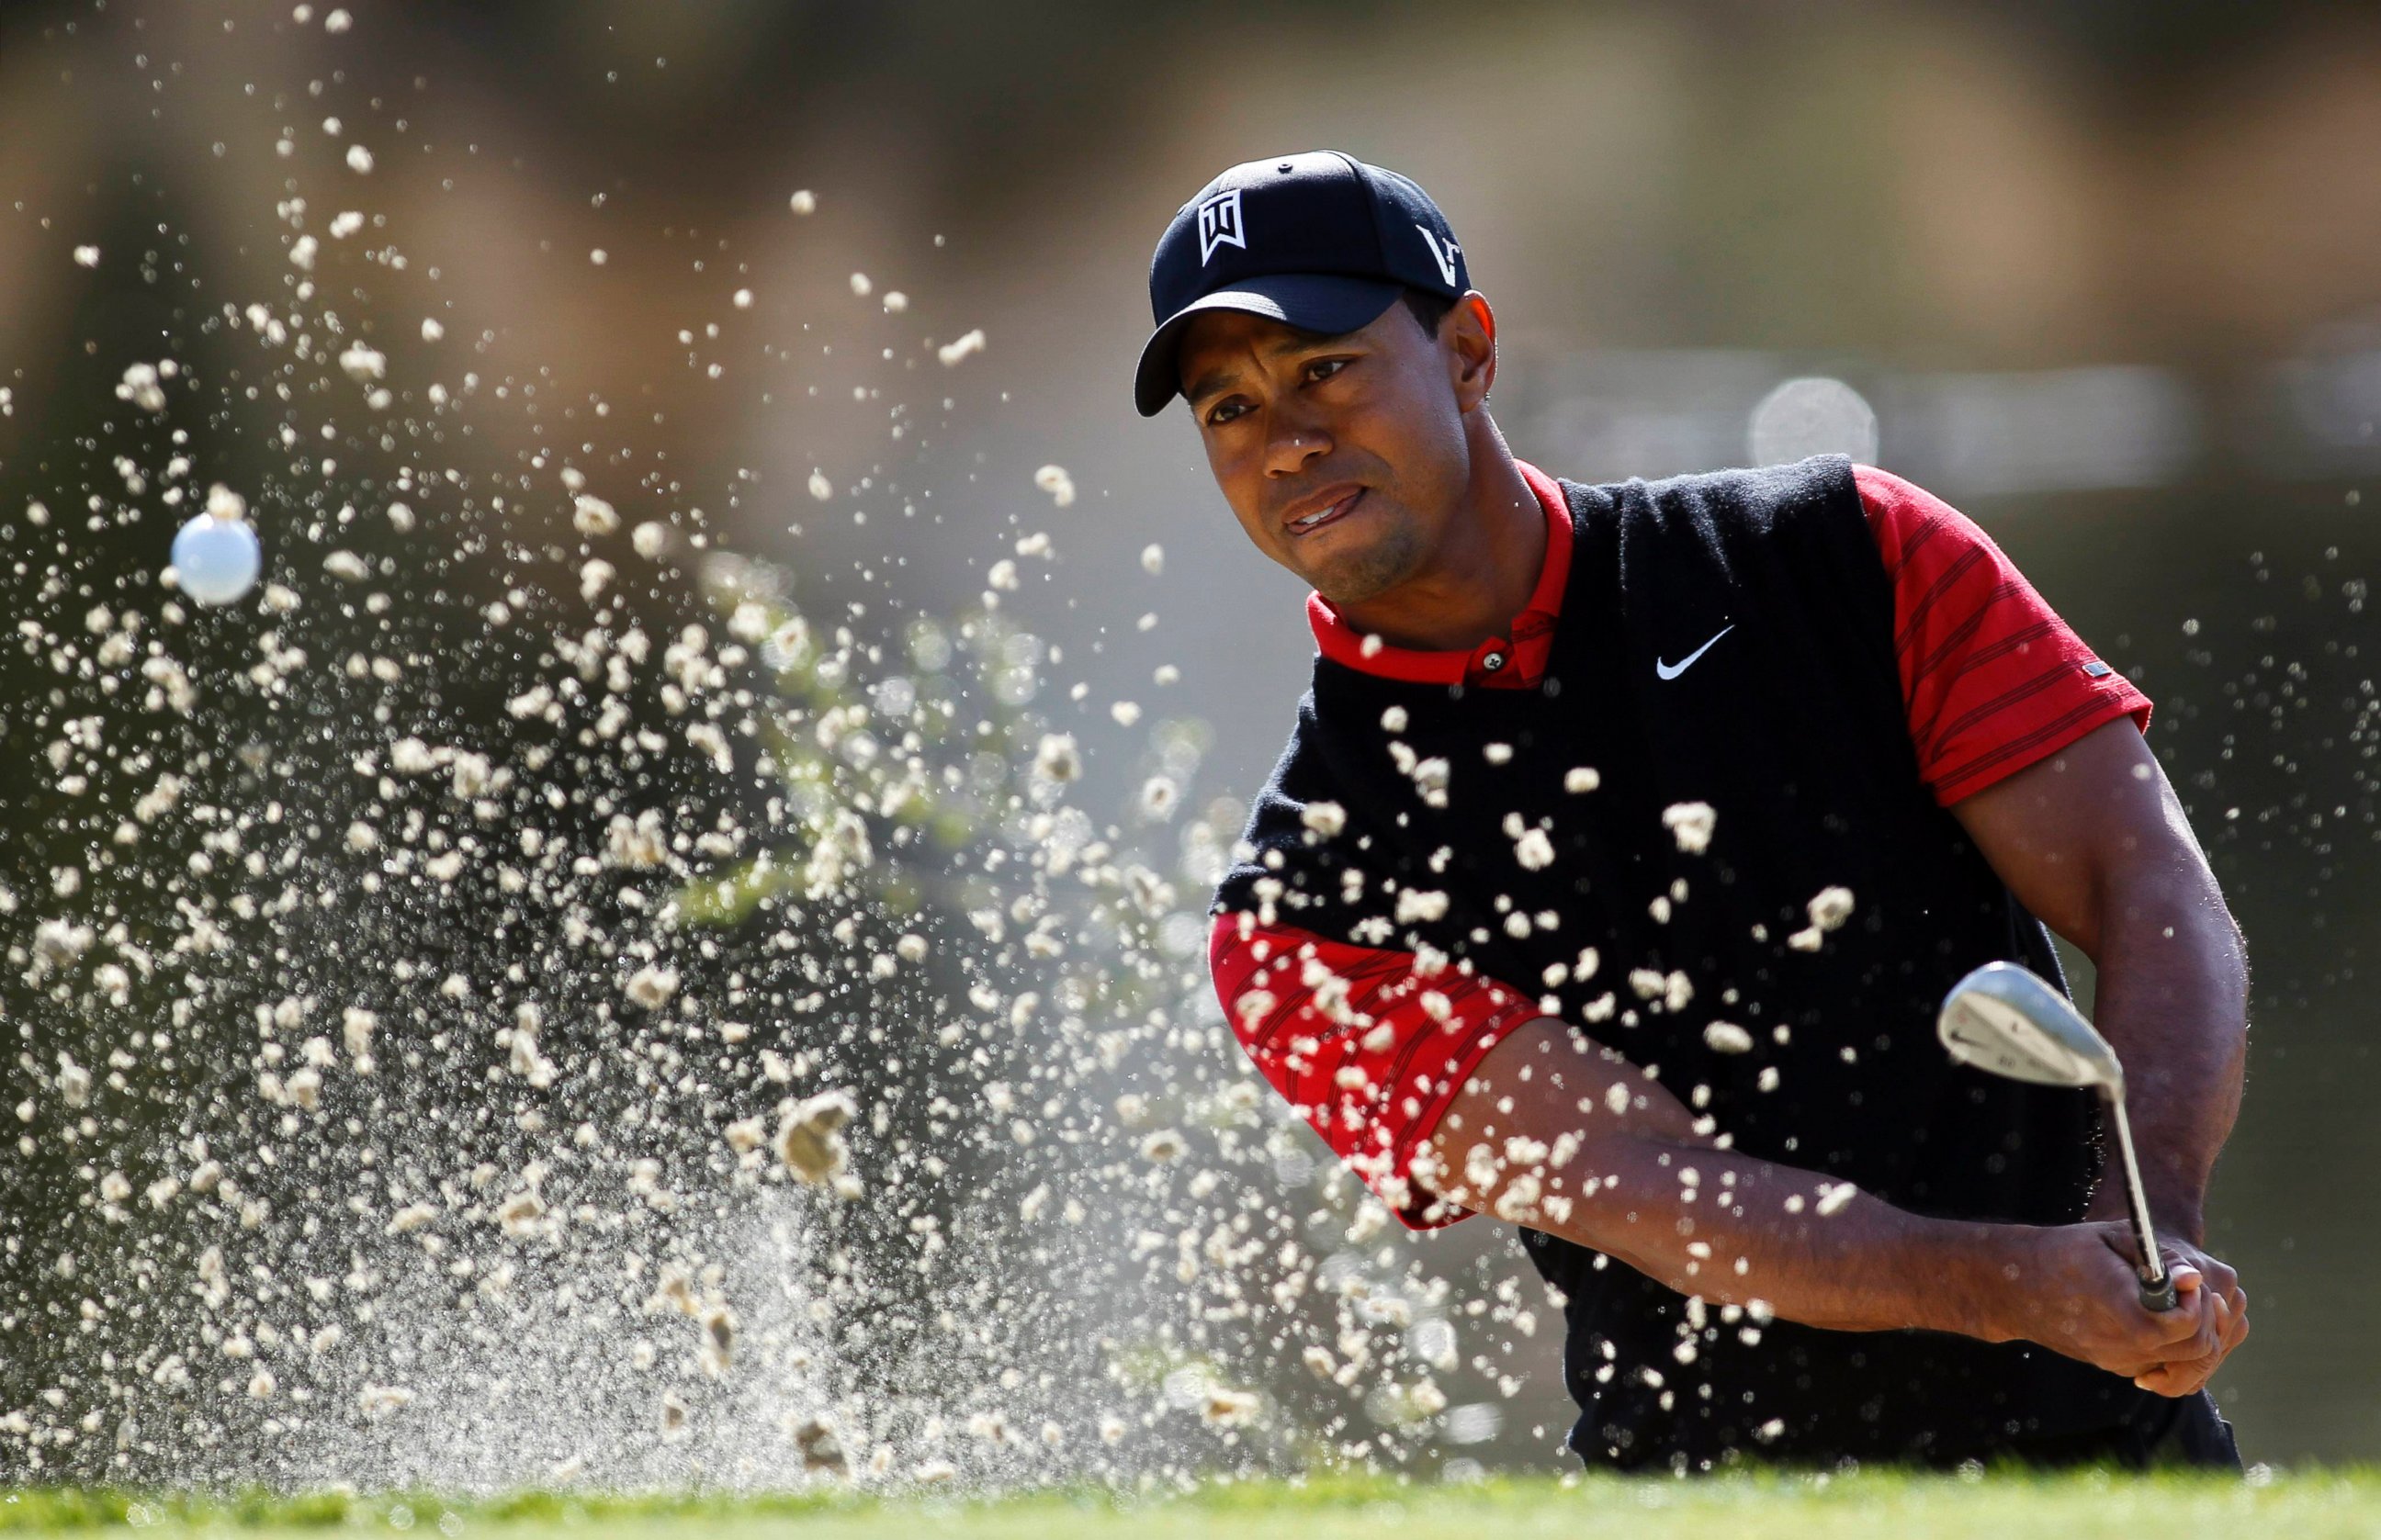 PHOTO: Tiger Woods hits out of a sand trap on the third hole during the final round of the Chevron World Challenge golf tournament at Sherwood Country Club, Dec. 4, 2011, in Thousand Oaks, Calif.